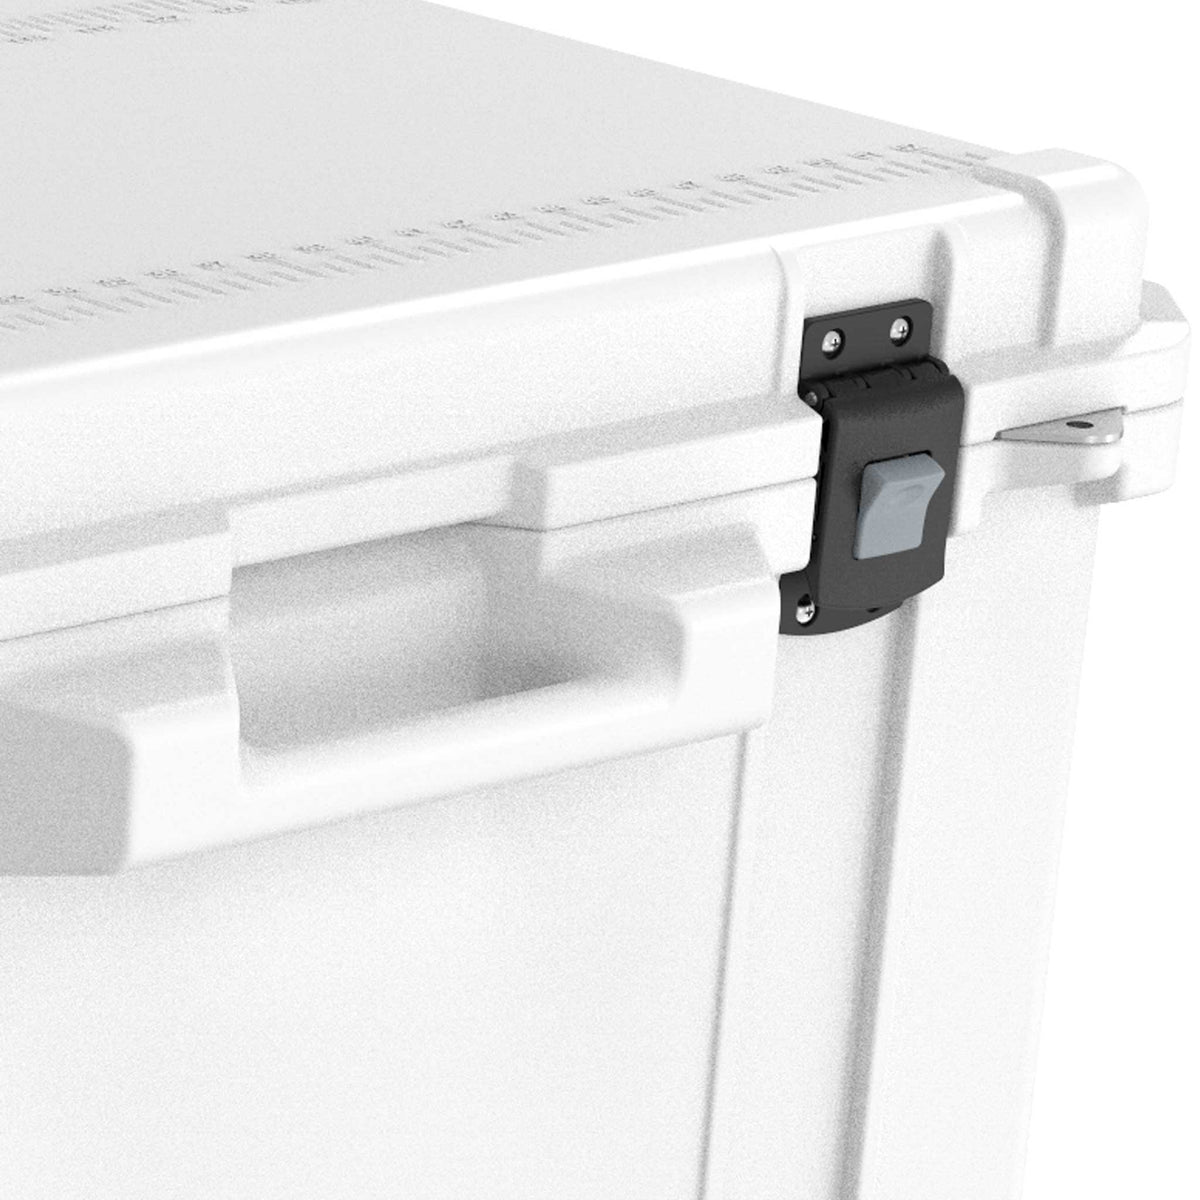 Pelican™ 250QT Elite Cooler comes with easy to use press &amp; pull latches